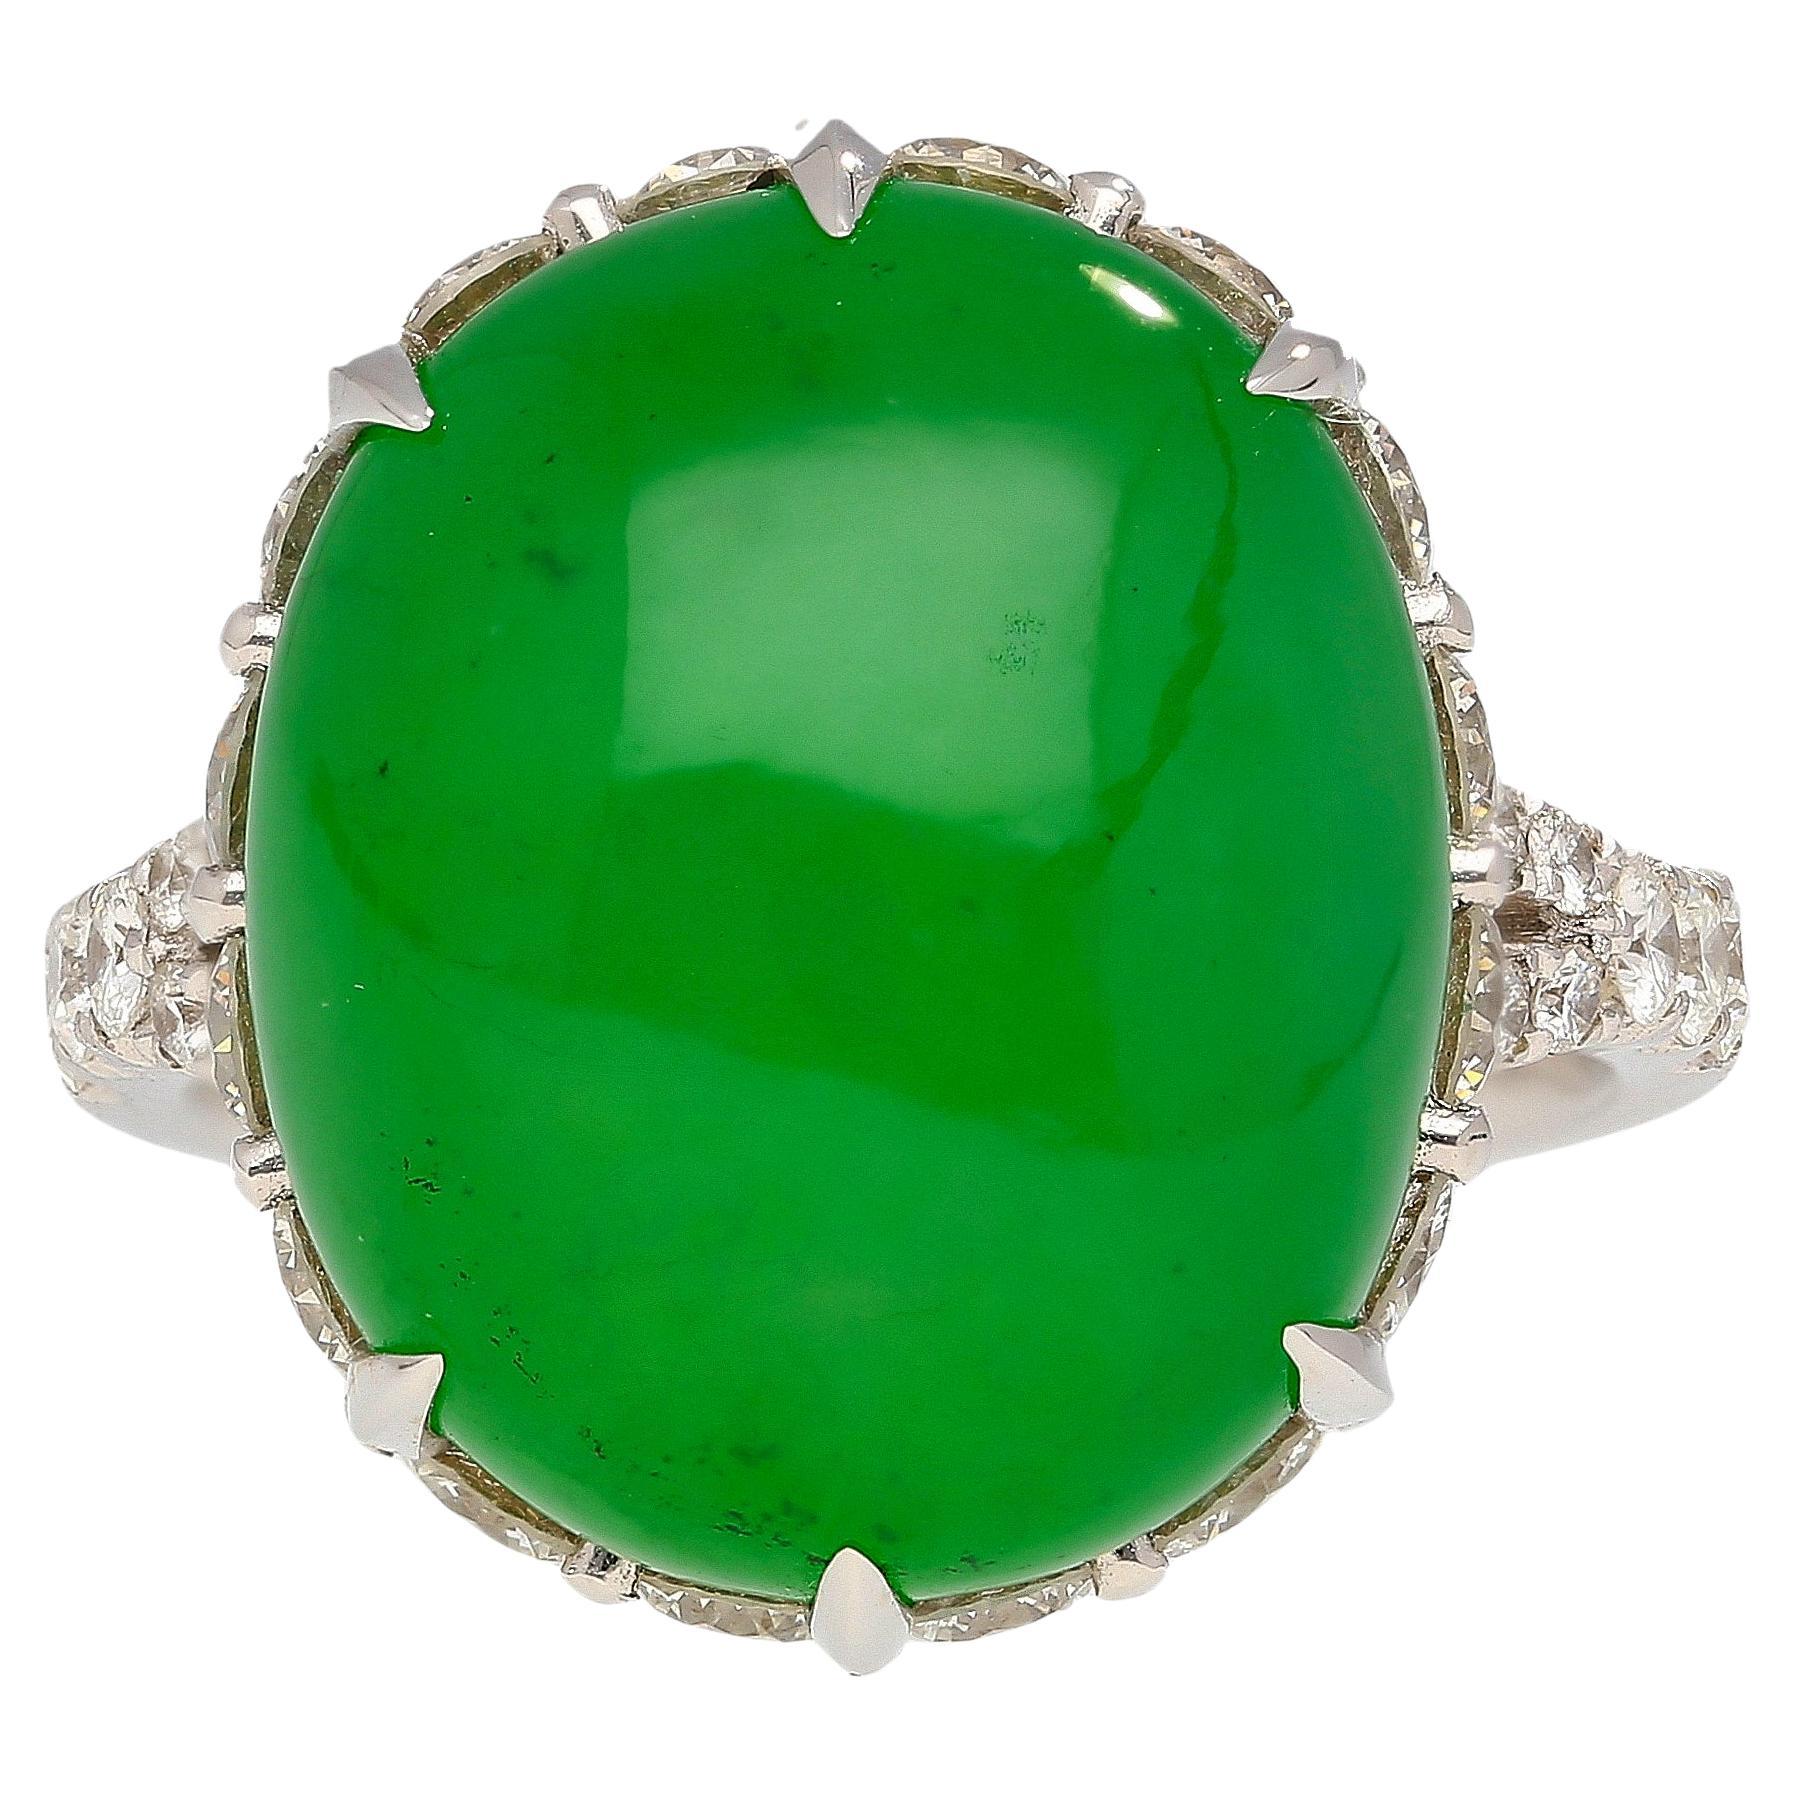 17.86 carat Jadeite Jade and Diamond Ring in 18K White Gold, weighing 6.72 grams. This size 7 (U.S.) ring, features an oval-cut Jade emitting a captivating green hue.

Surrounding the Jade are 16 round-cut diamonds (1.58 CTTW, 3mm) and 62 more (0.70